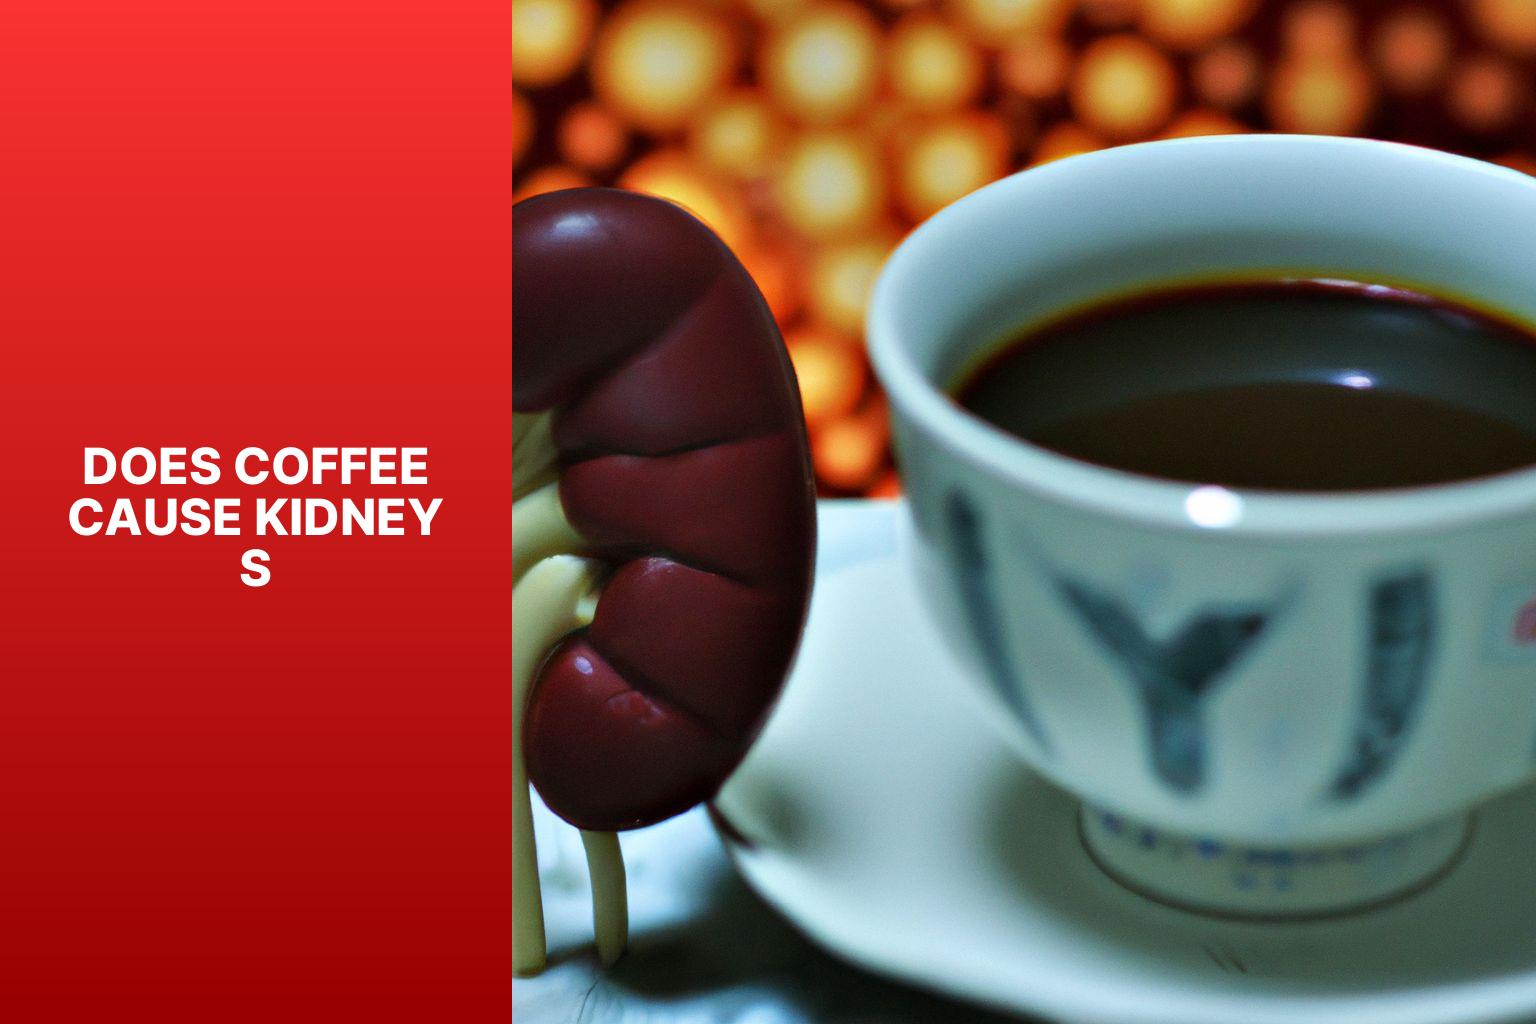 Does Coffee Cause Kidney Stones? Exploring the Science Behind the Claim